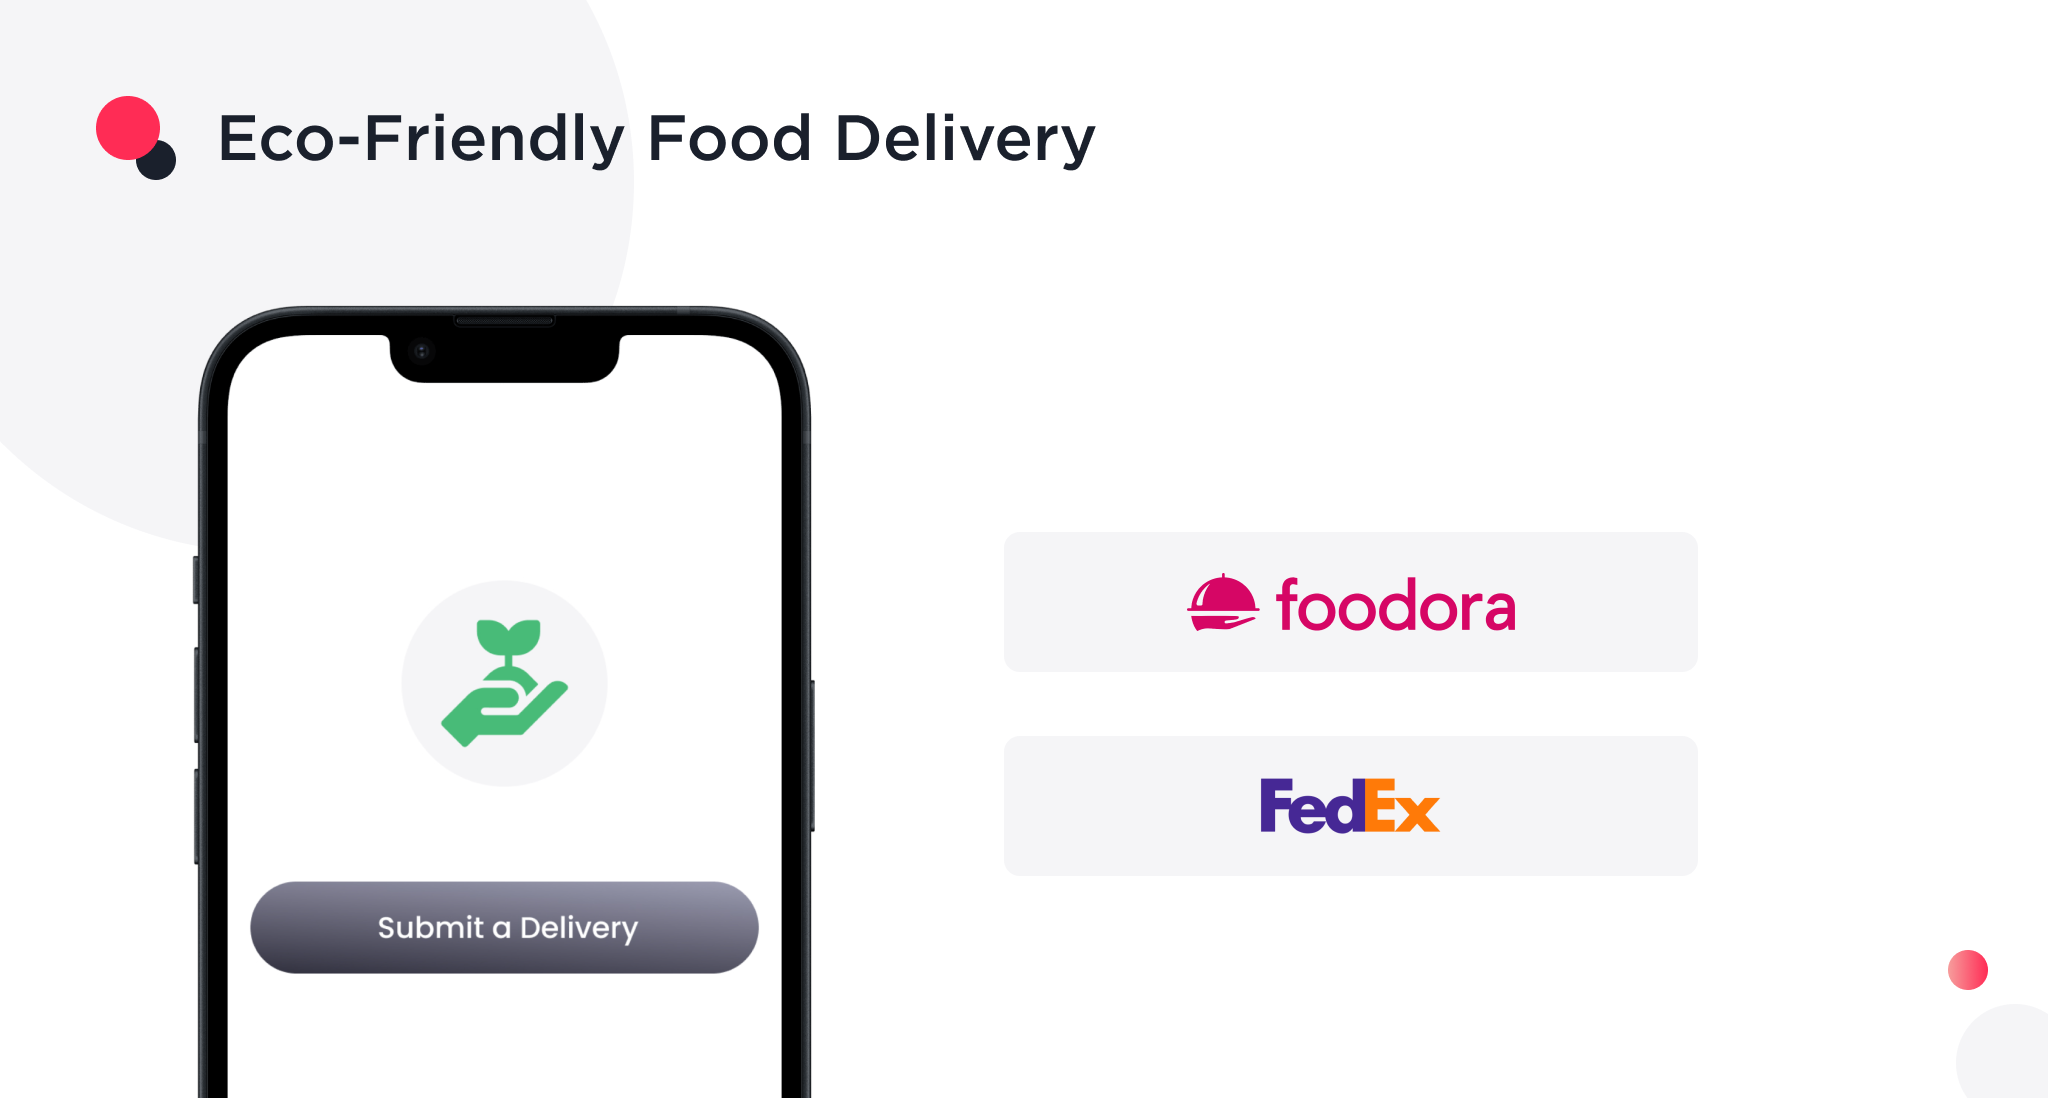 the image shows eco-friendly food delivery 